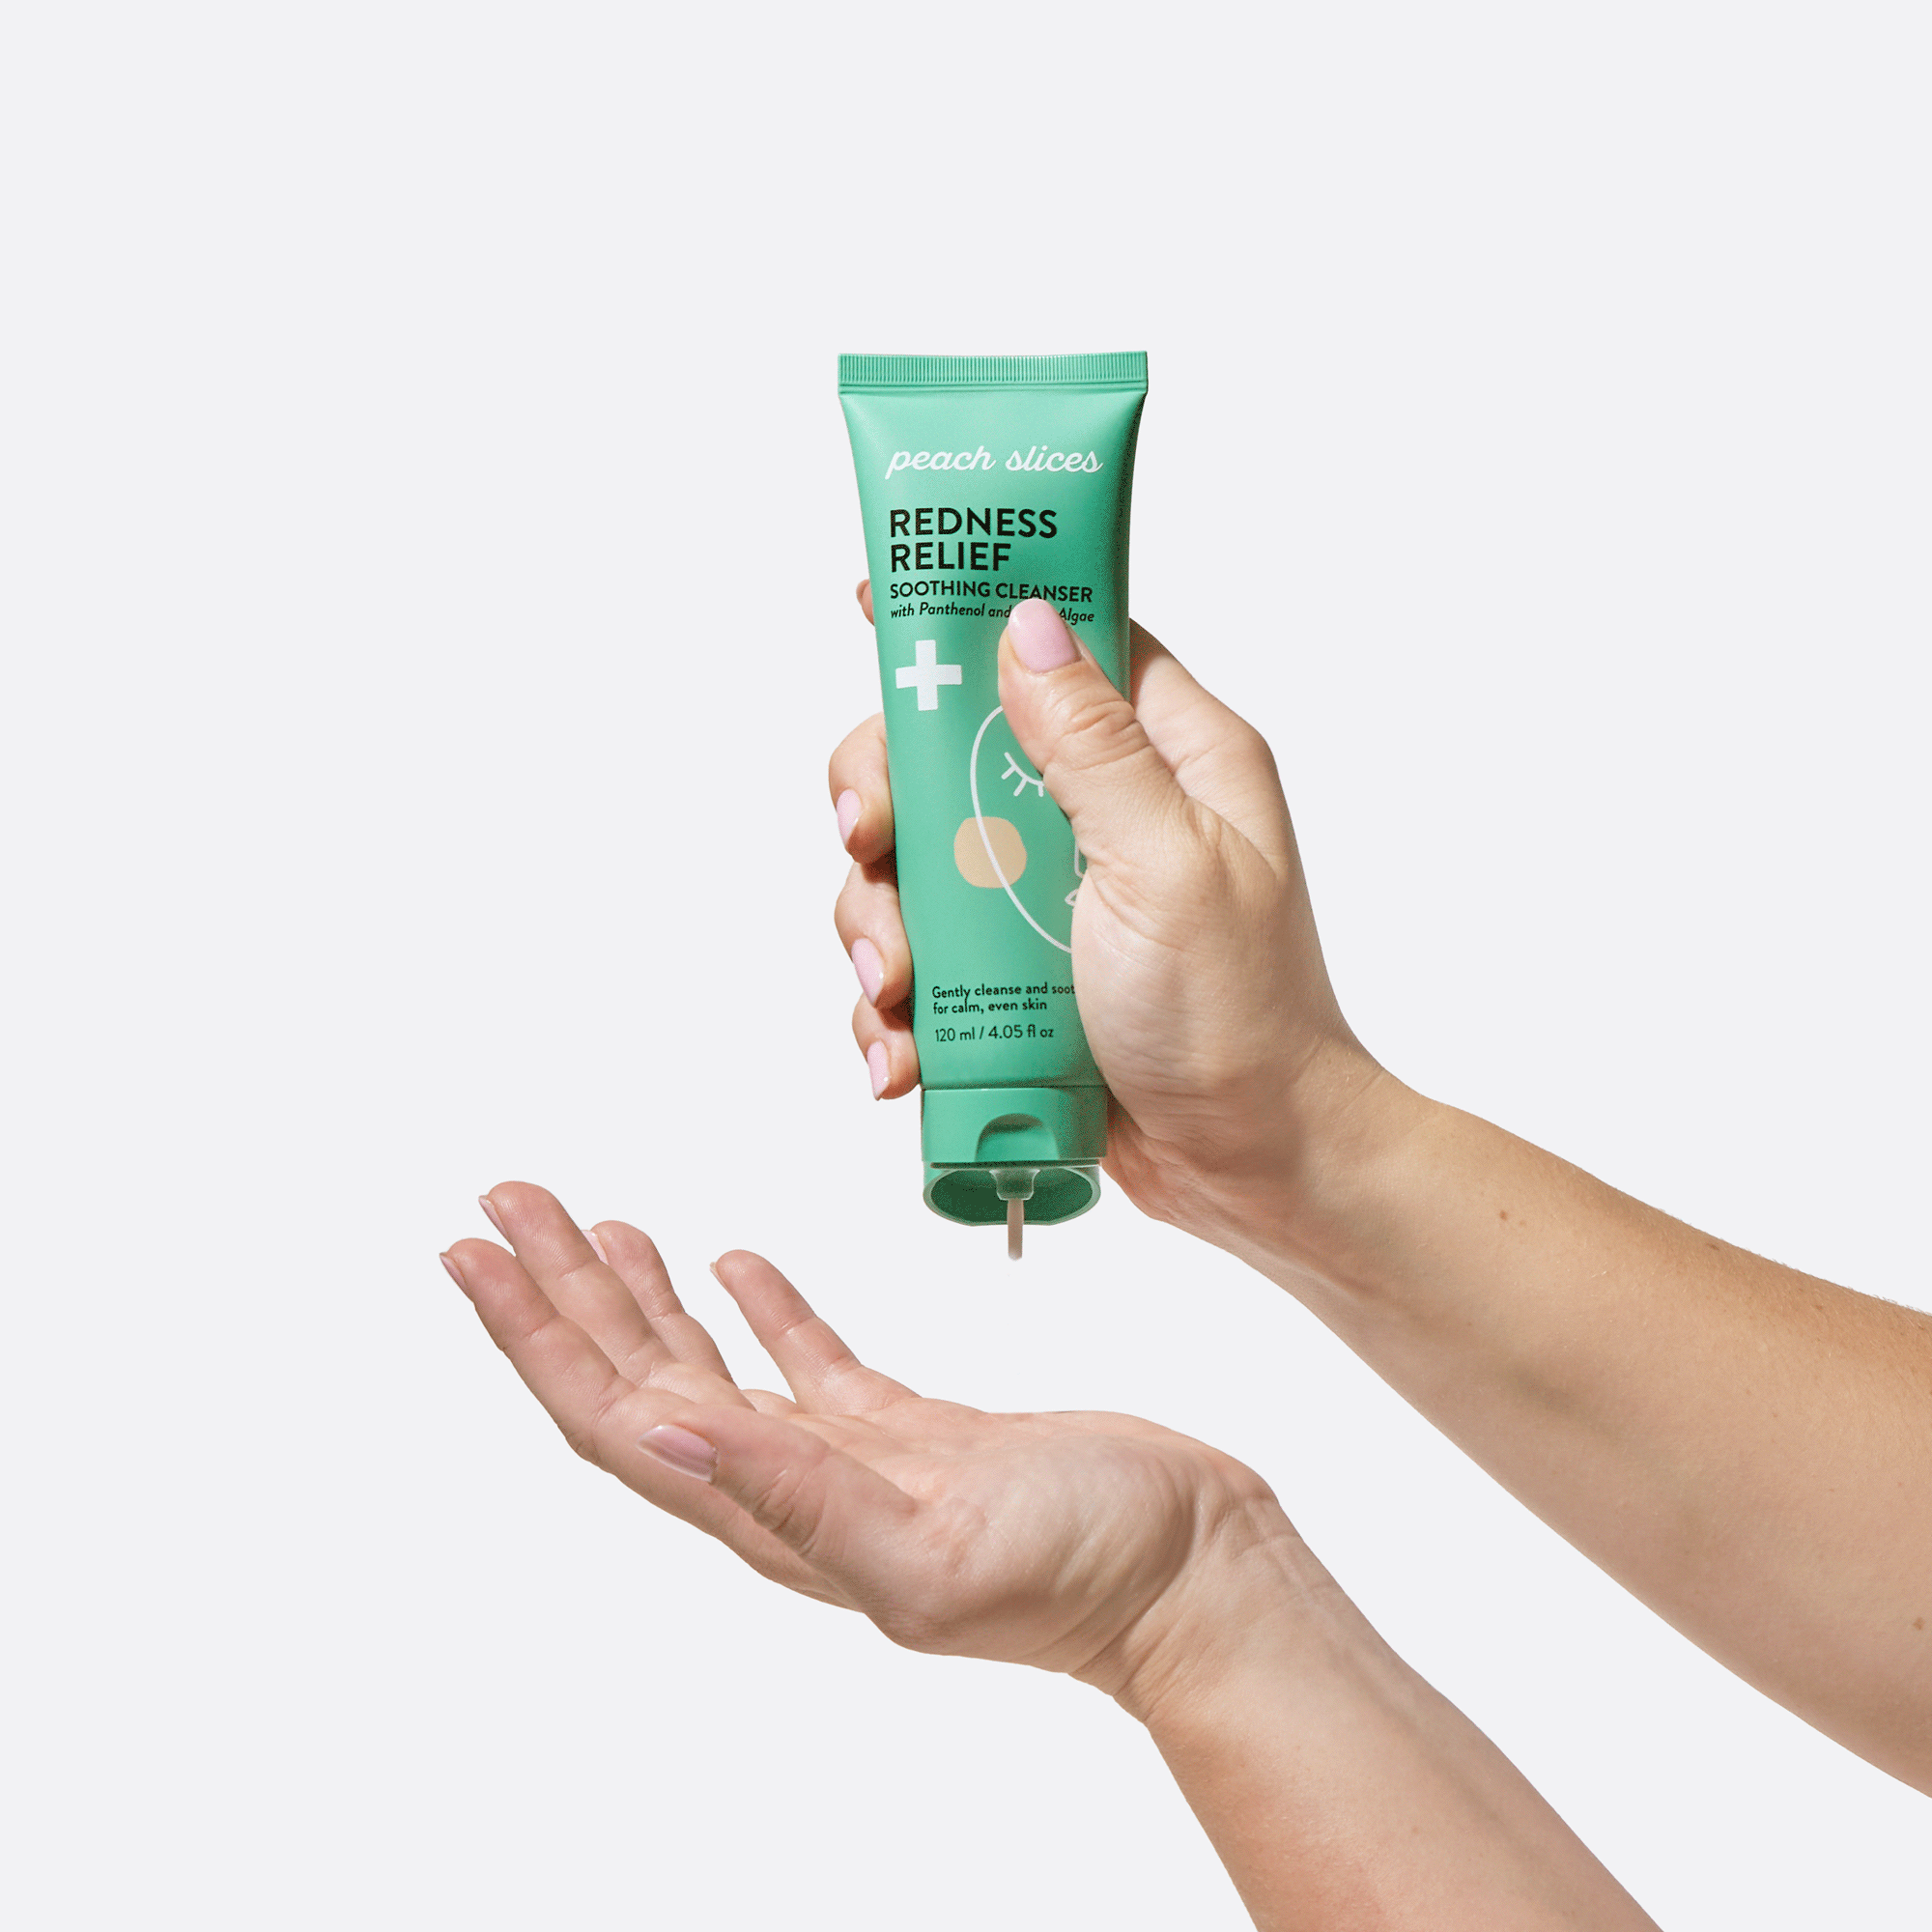 Someone squeezes out Redness Relief Soothing Cleanser into their hand, showing off the easy-squeeze bottle and smooth texture of the product